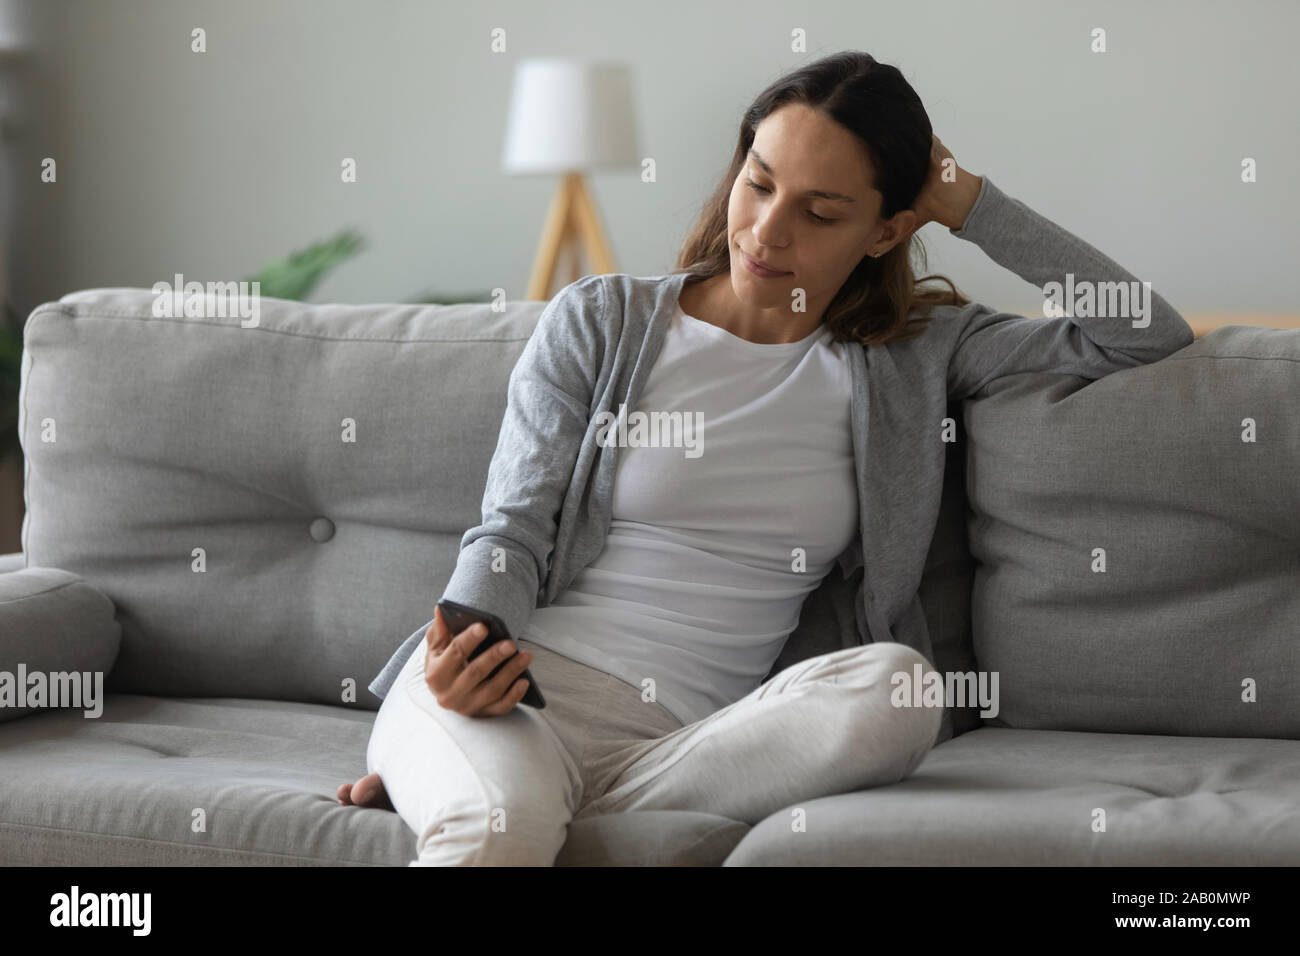 Attractive 30s woman sitting on couch using mobile phone Stock Photo